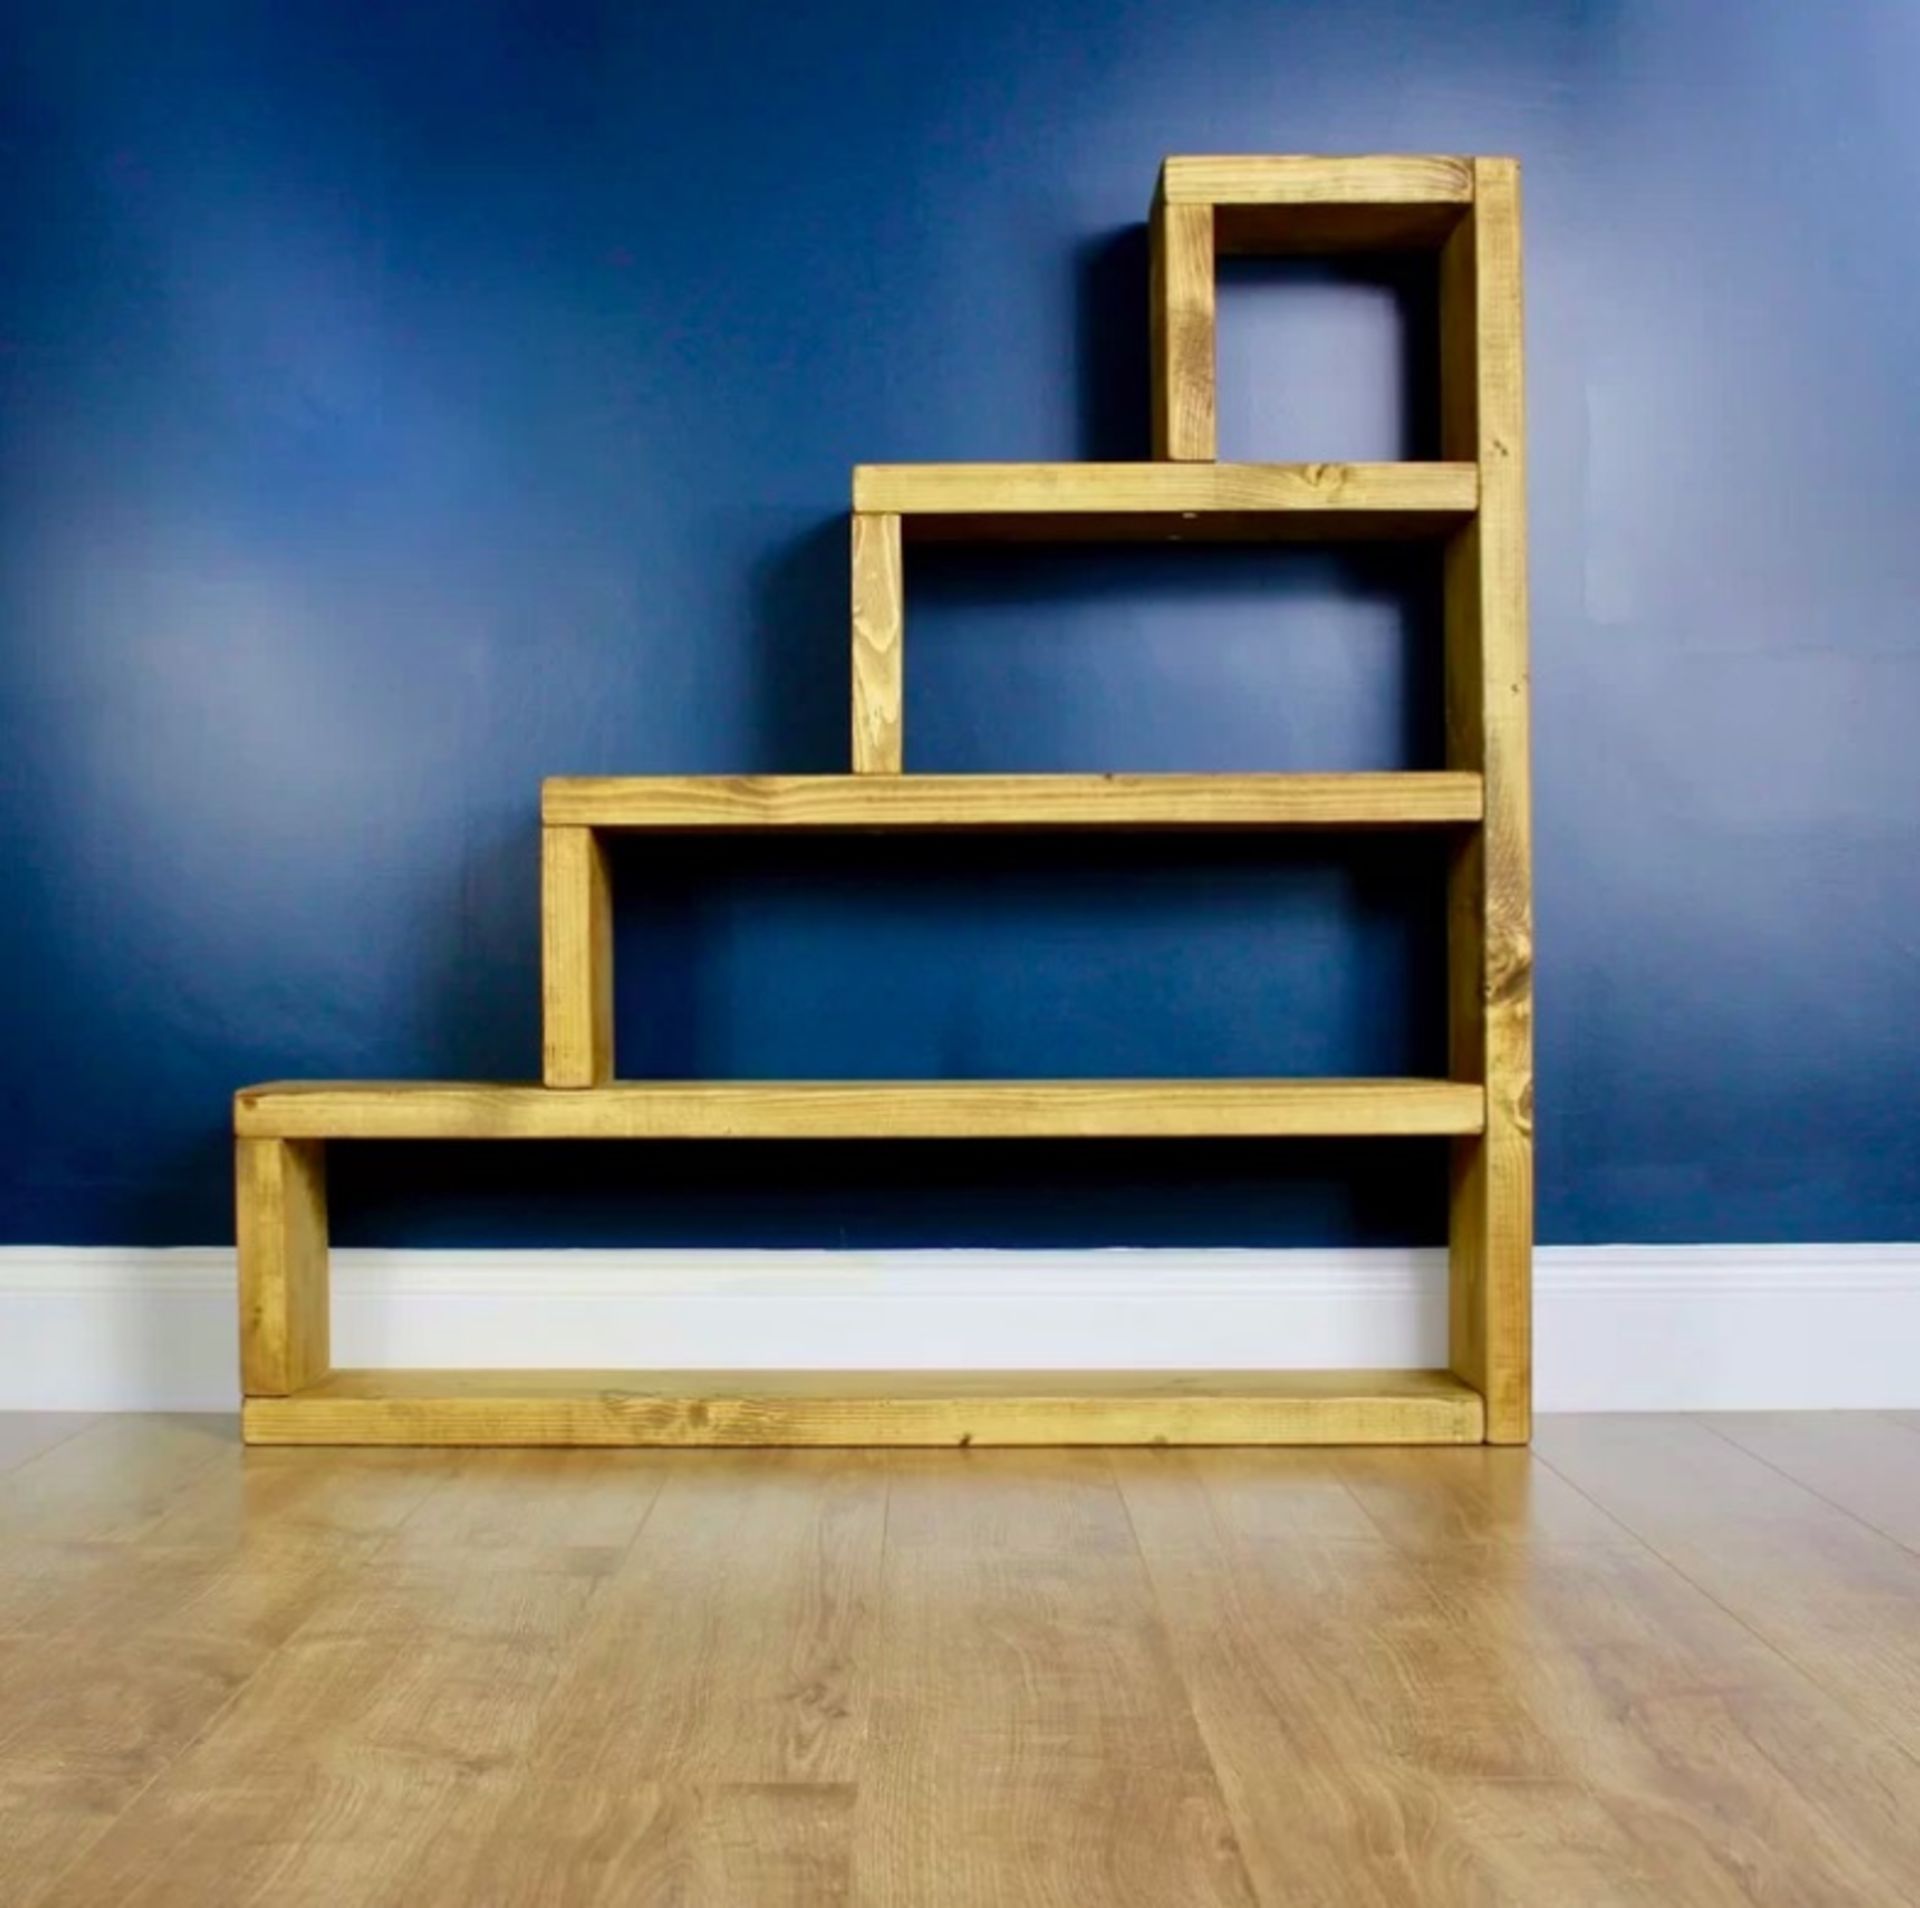 Rustic Bookcase Tired Bookcase / Display Being Handmade, Each Solid Wooden Bookcase Is Truly